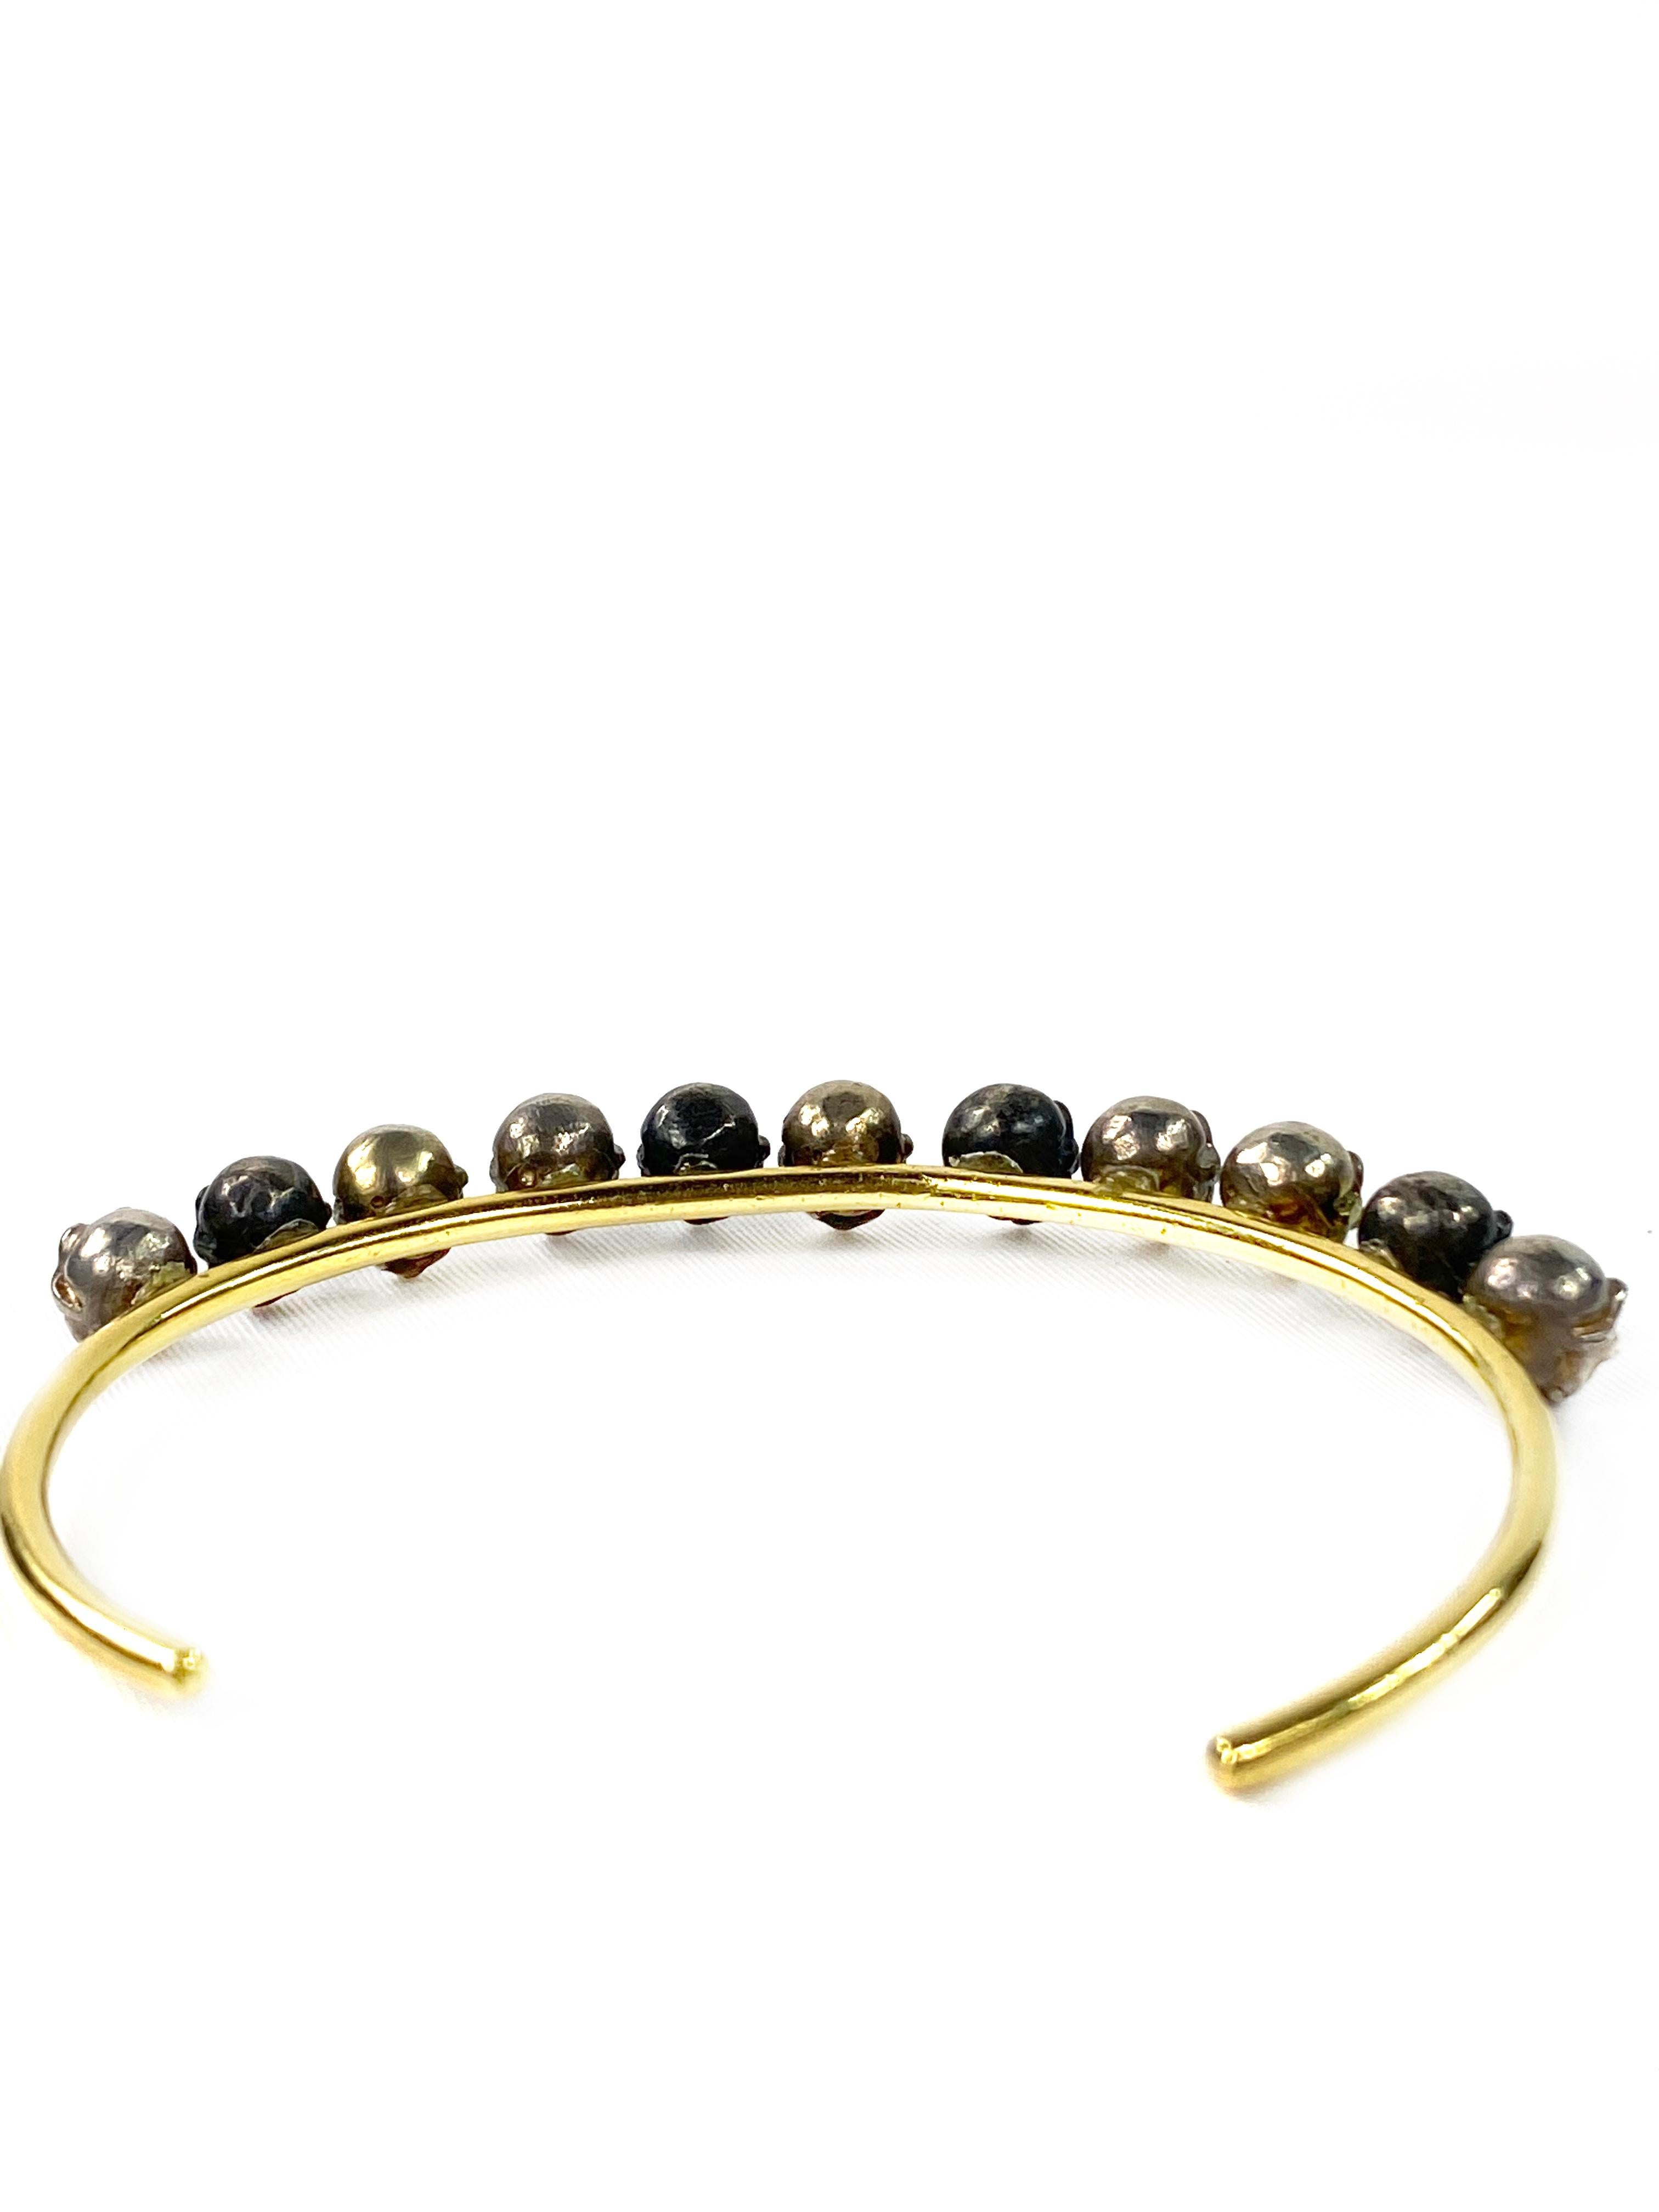 Delfina Delettrez Yellow Gold Scull Bangle Bracelet In Excellent Condition For Sale In Beverly Hills, CA